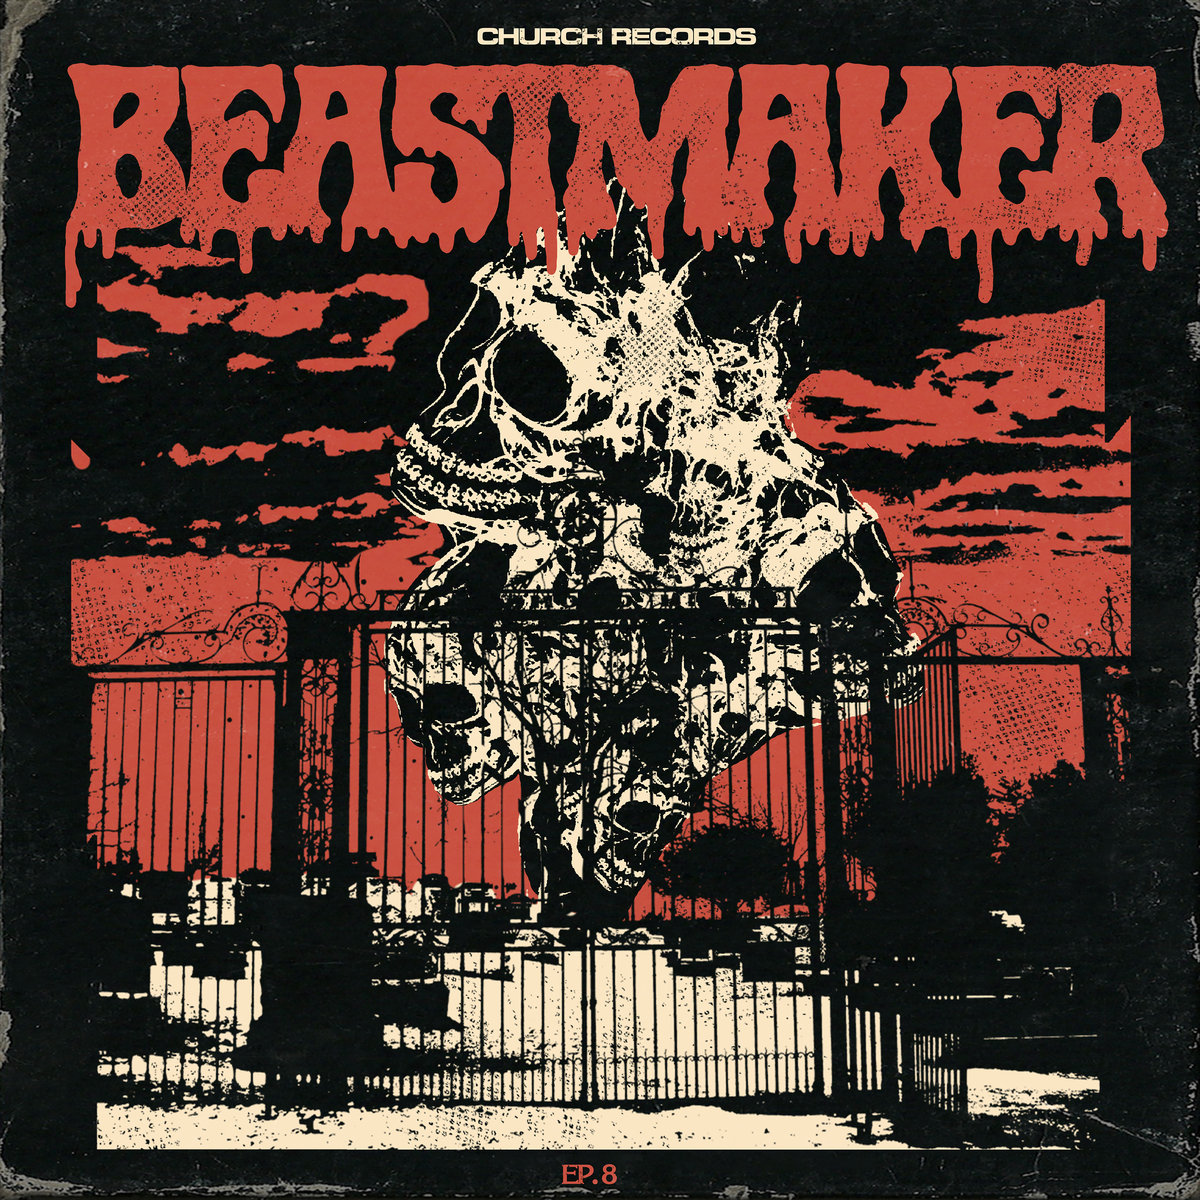 Beastmaker EP-8 Night Of The Eagle True Believers Unholy Communion Unpure